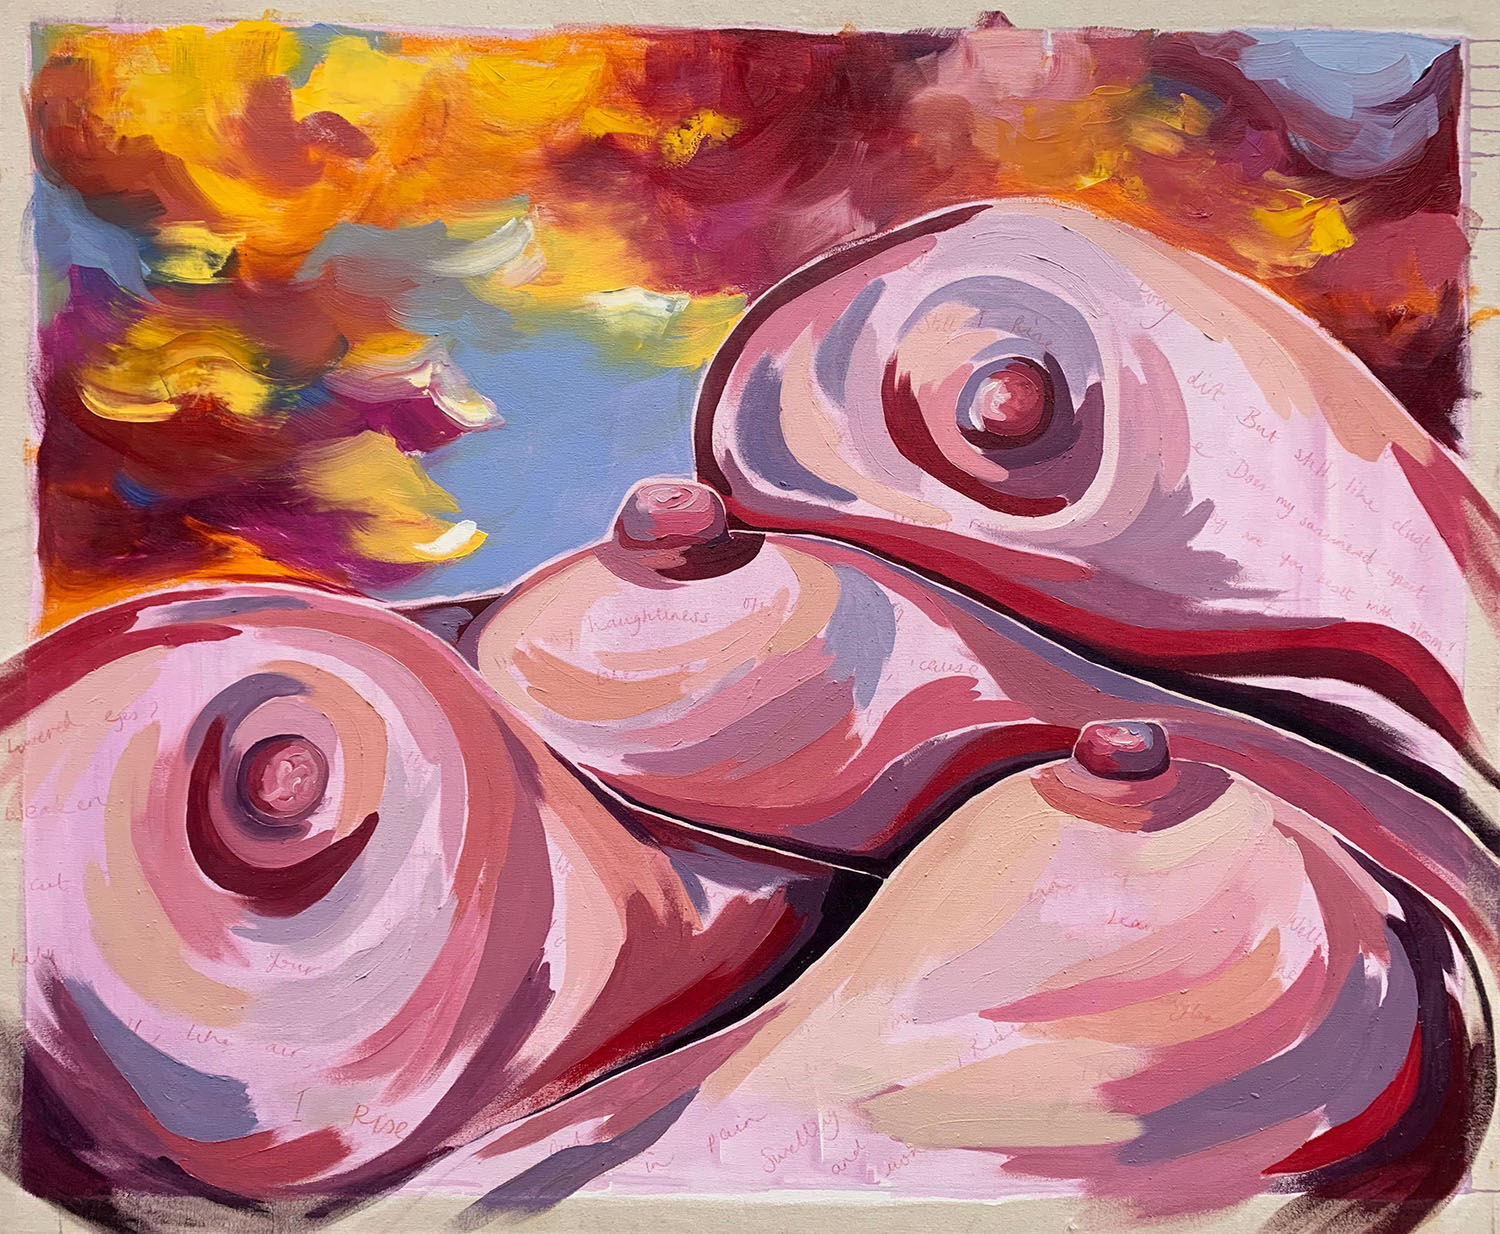 Painting of multiple of breasts